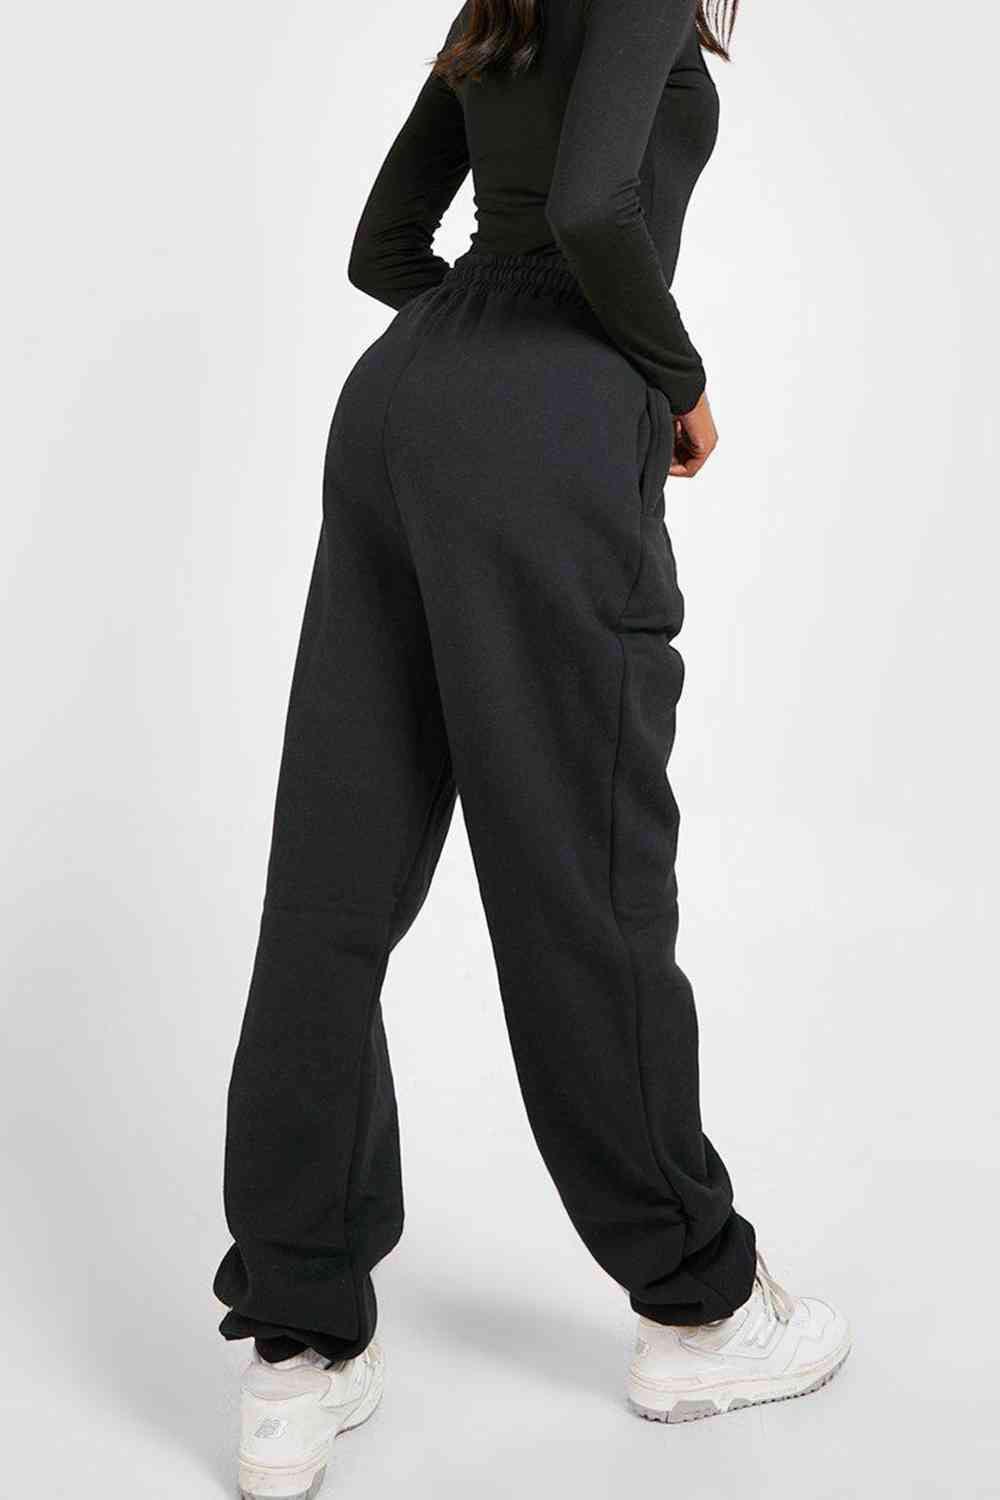 Simply Love Full Size GIRL POWER Graphic Sweatpants - Immenzive